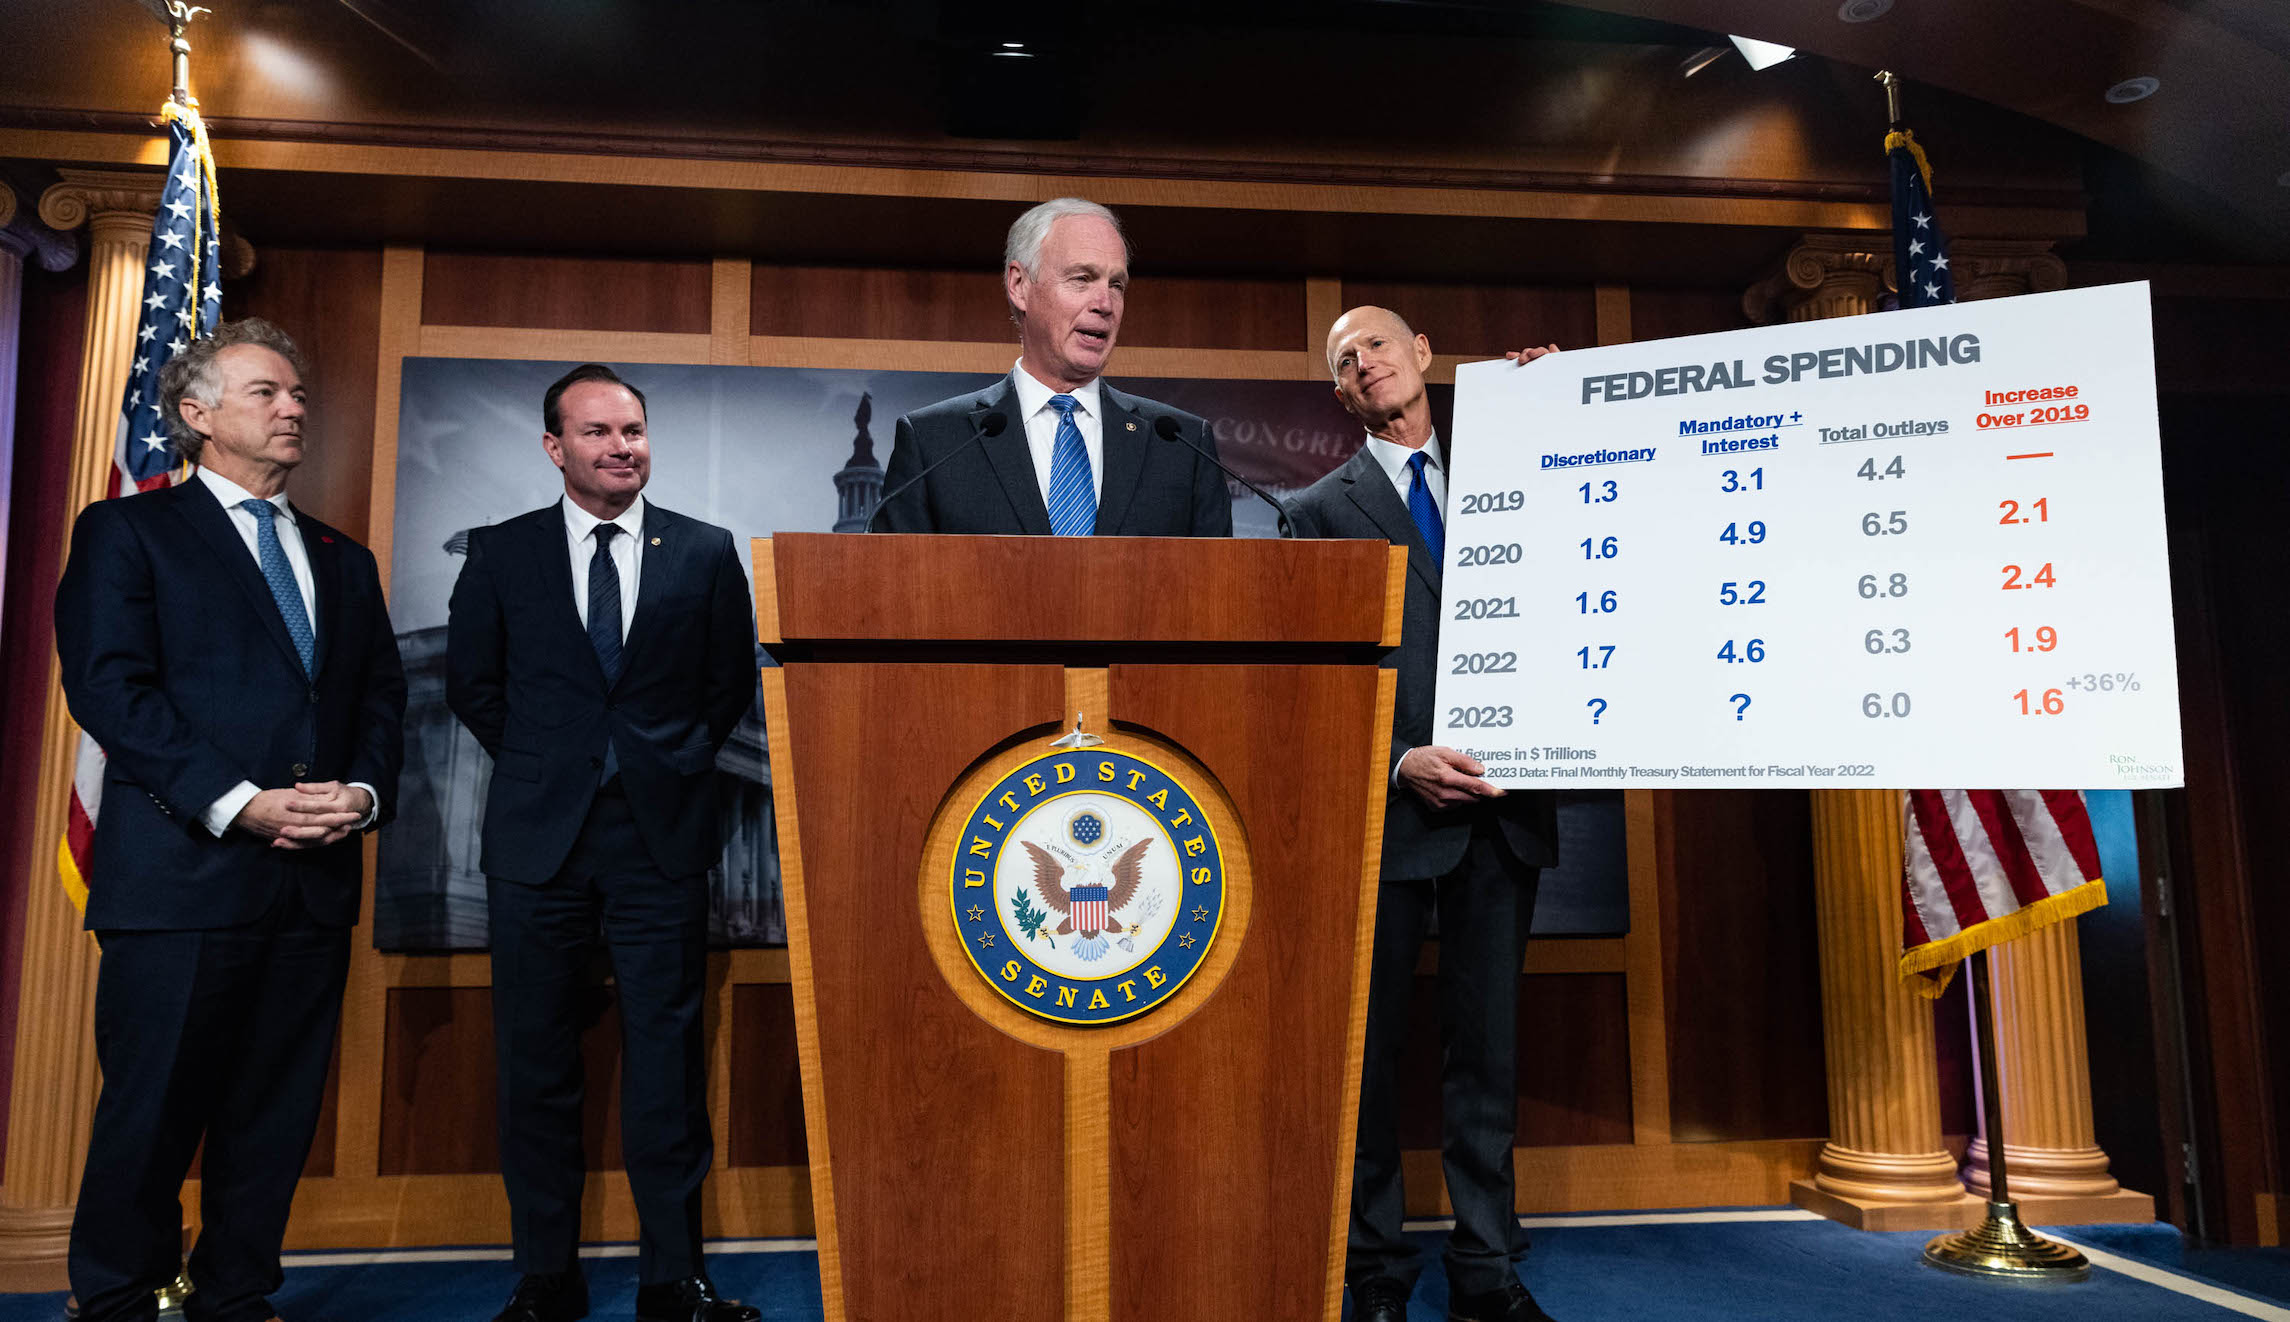 A group of Republican senators, from left, Sen. Rand Paul (R-KY), Sen. Mike Lee (R-UT), Sen. Ron Johnson (R-WI), and Sen. Rick Scott (R-FL) tell reporters that they want a clean CR that extends government funding until after the new Congress begins in 2023 at the Capitol in Washington, Wednesday, December 7, 2022. 